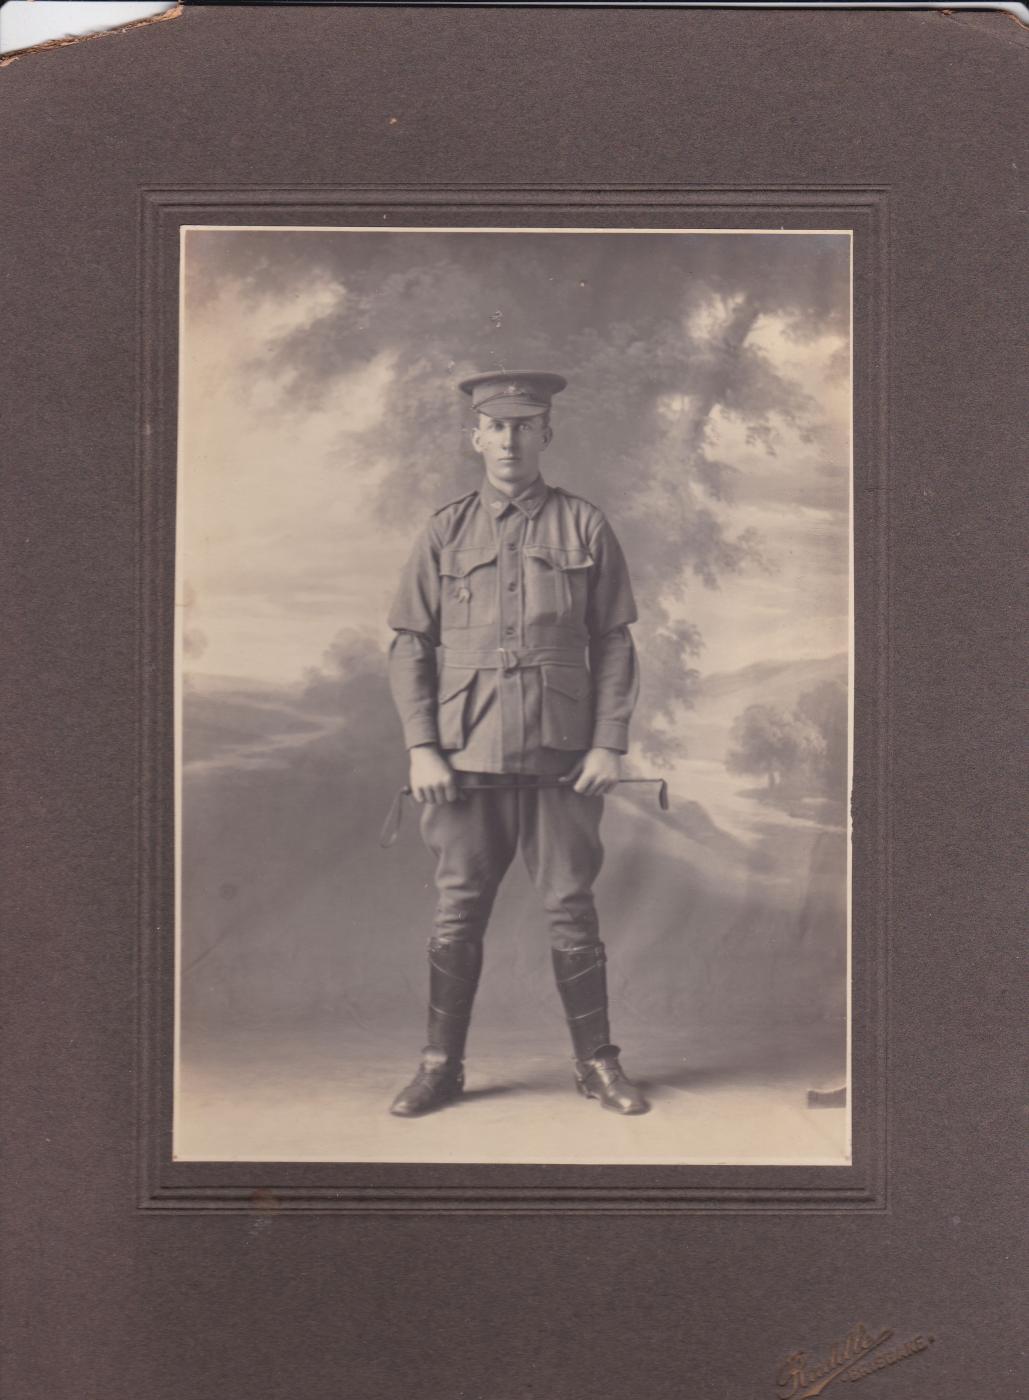 Black and white photograph of John Gordon Leslie (Gordon) Campbell in his Light Horse Uniform, taken in a studio.  He wears a cap instead of the slouch hat, military tunic, riding breeches, leather leggings and boots, and carries a riding crop.